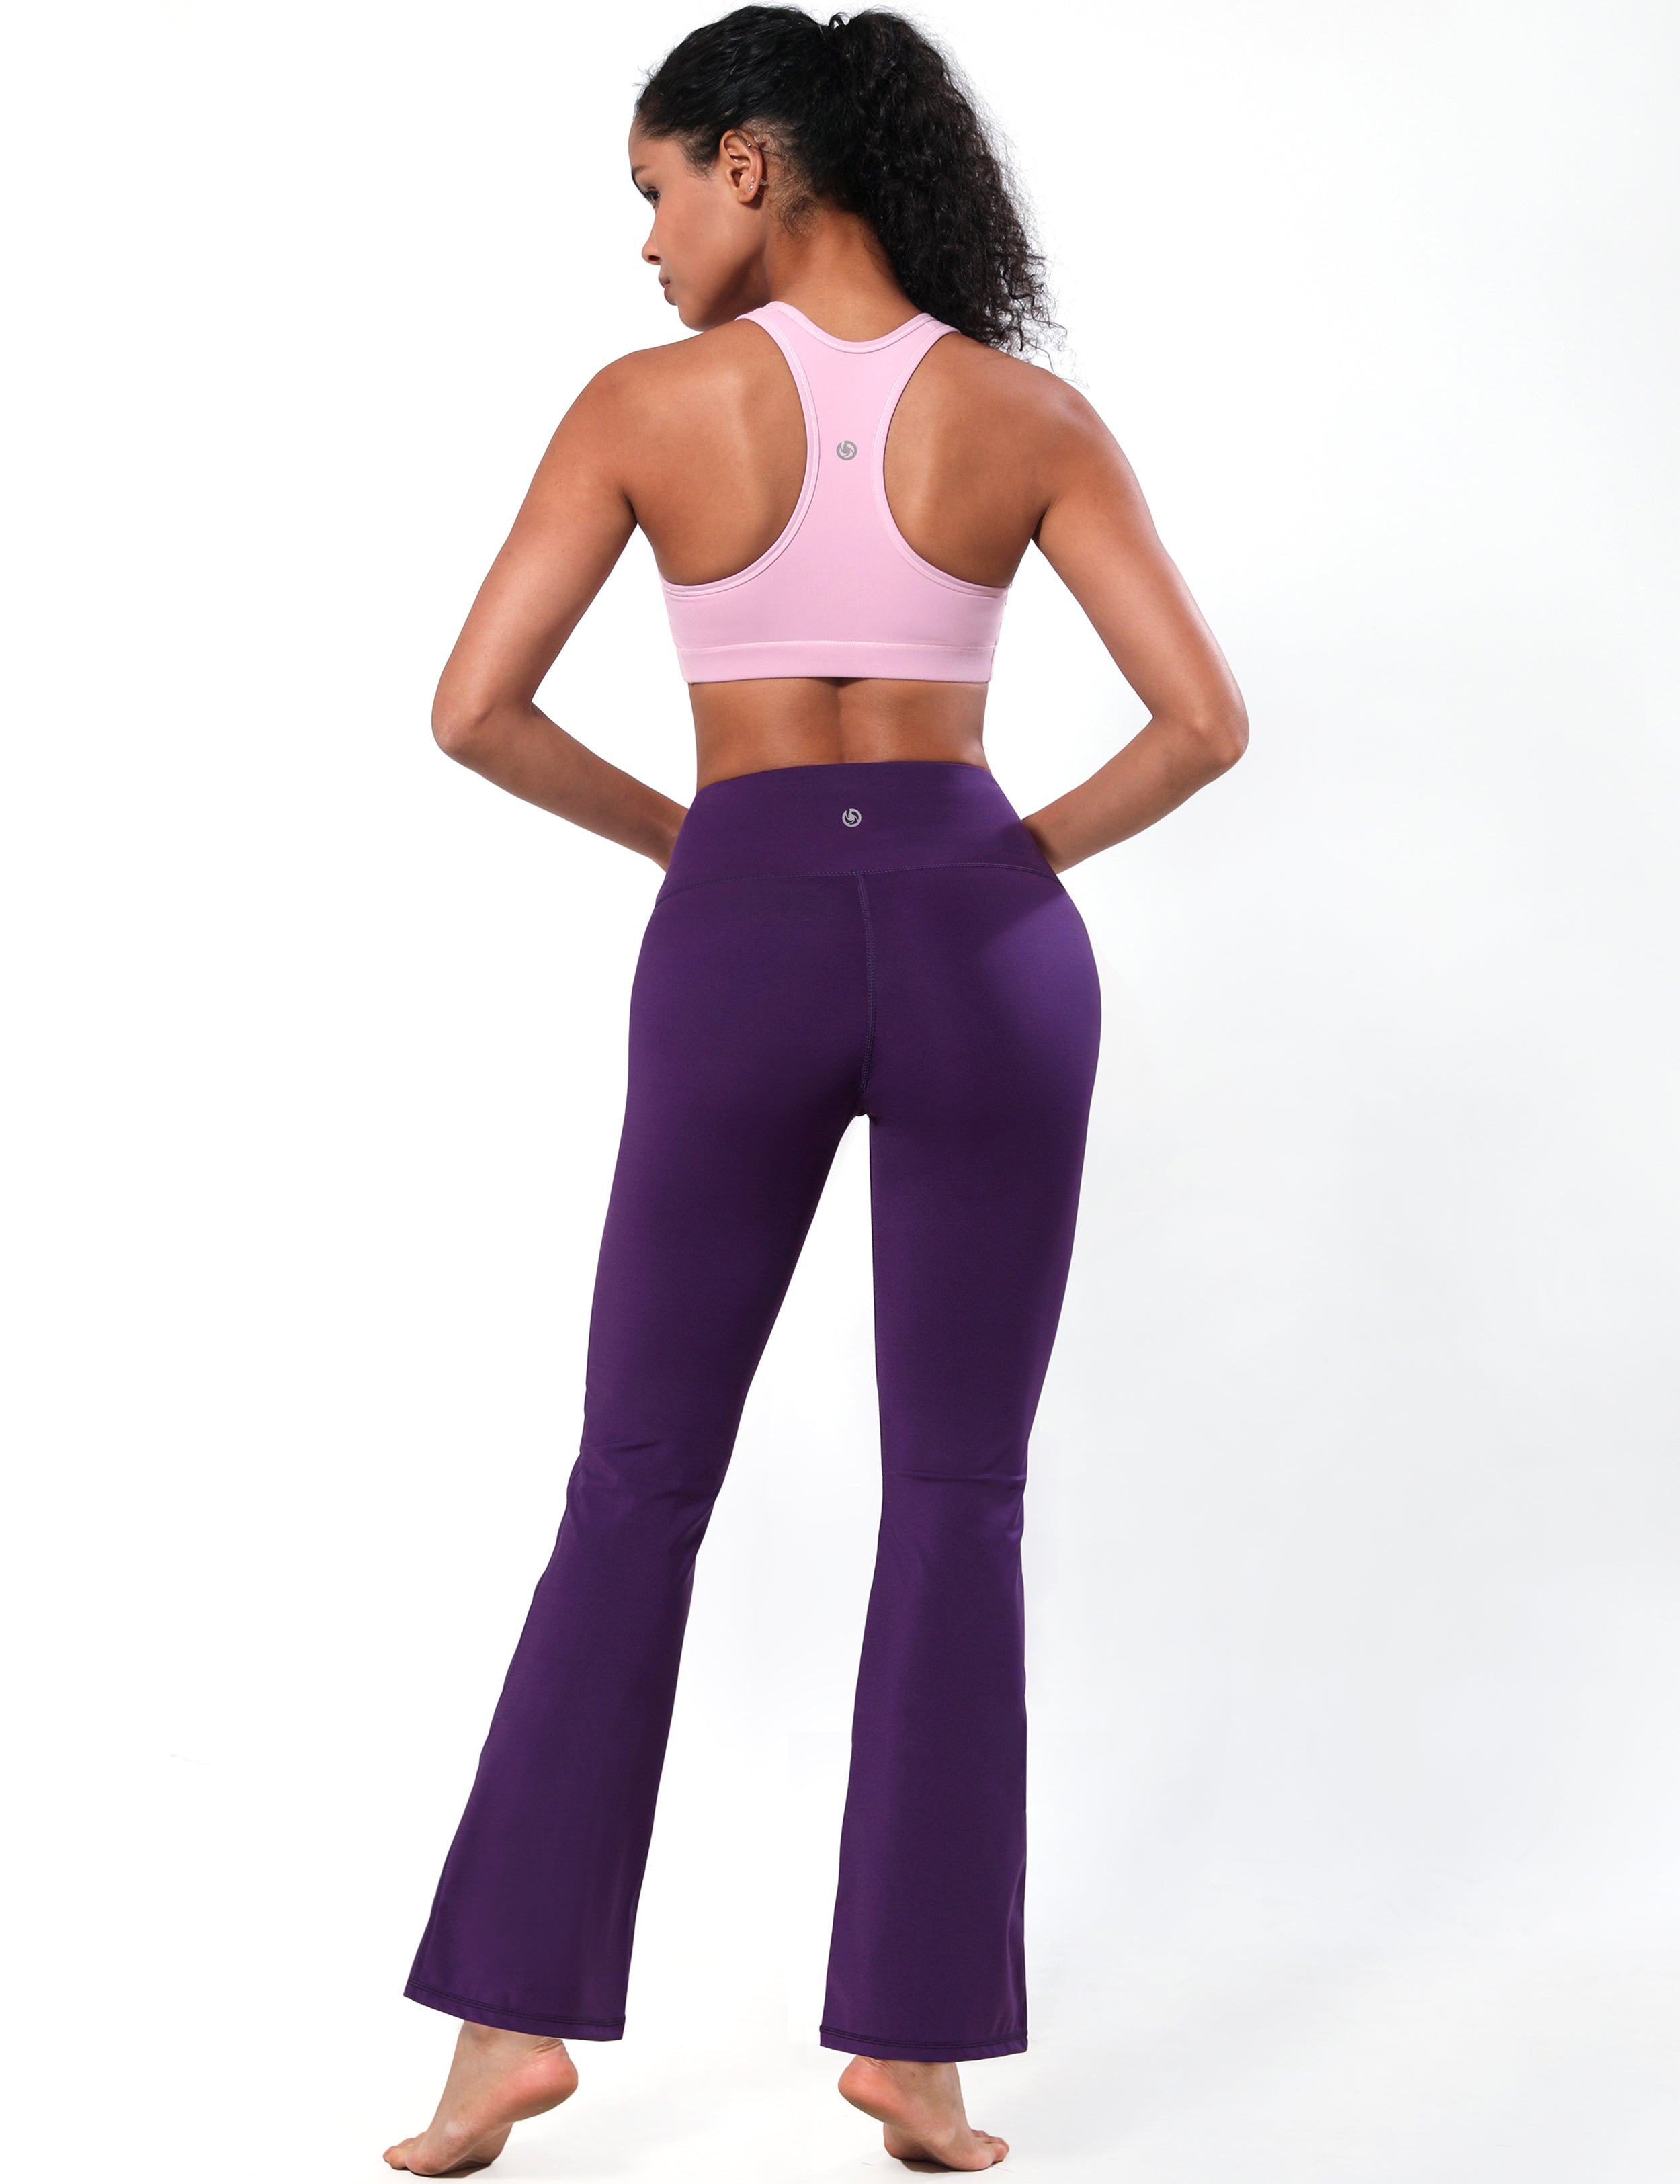 High Waist Bootcut Leggings pansypurple 75%Nylon/25%Spandex Fabric doesn't attract lint easily 4-way stretch No see-through Moisture-wicking Tummy control Inner pocket Five lengths